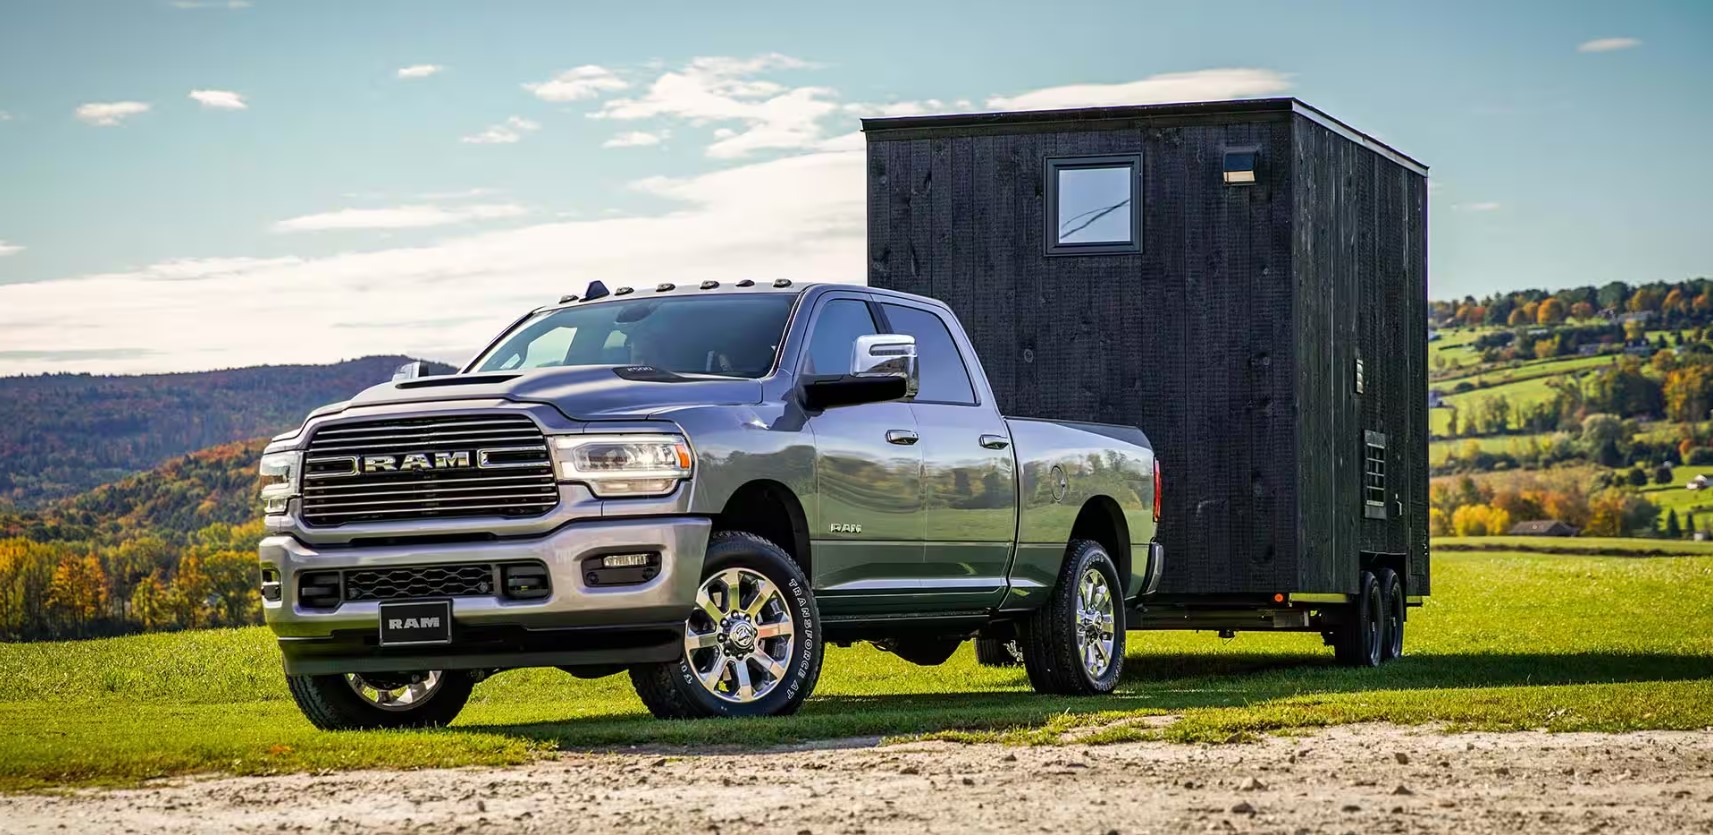 New Ram available in Saginaw, MI at Thelen Chrysler Dodge Jeep Ram